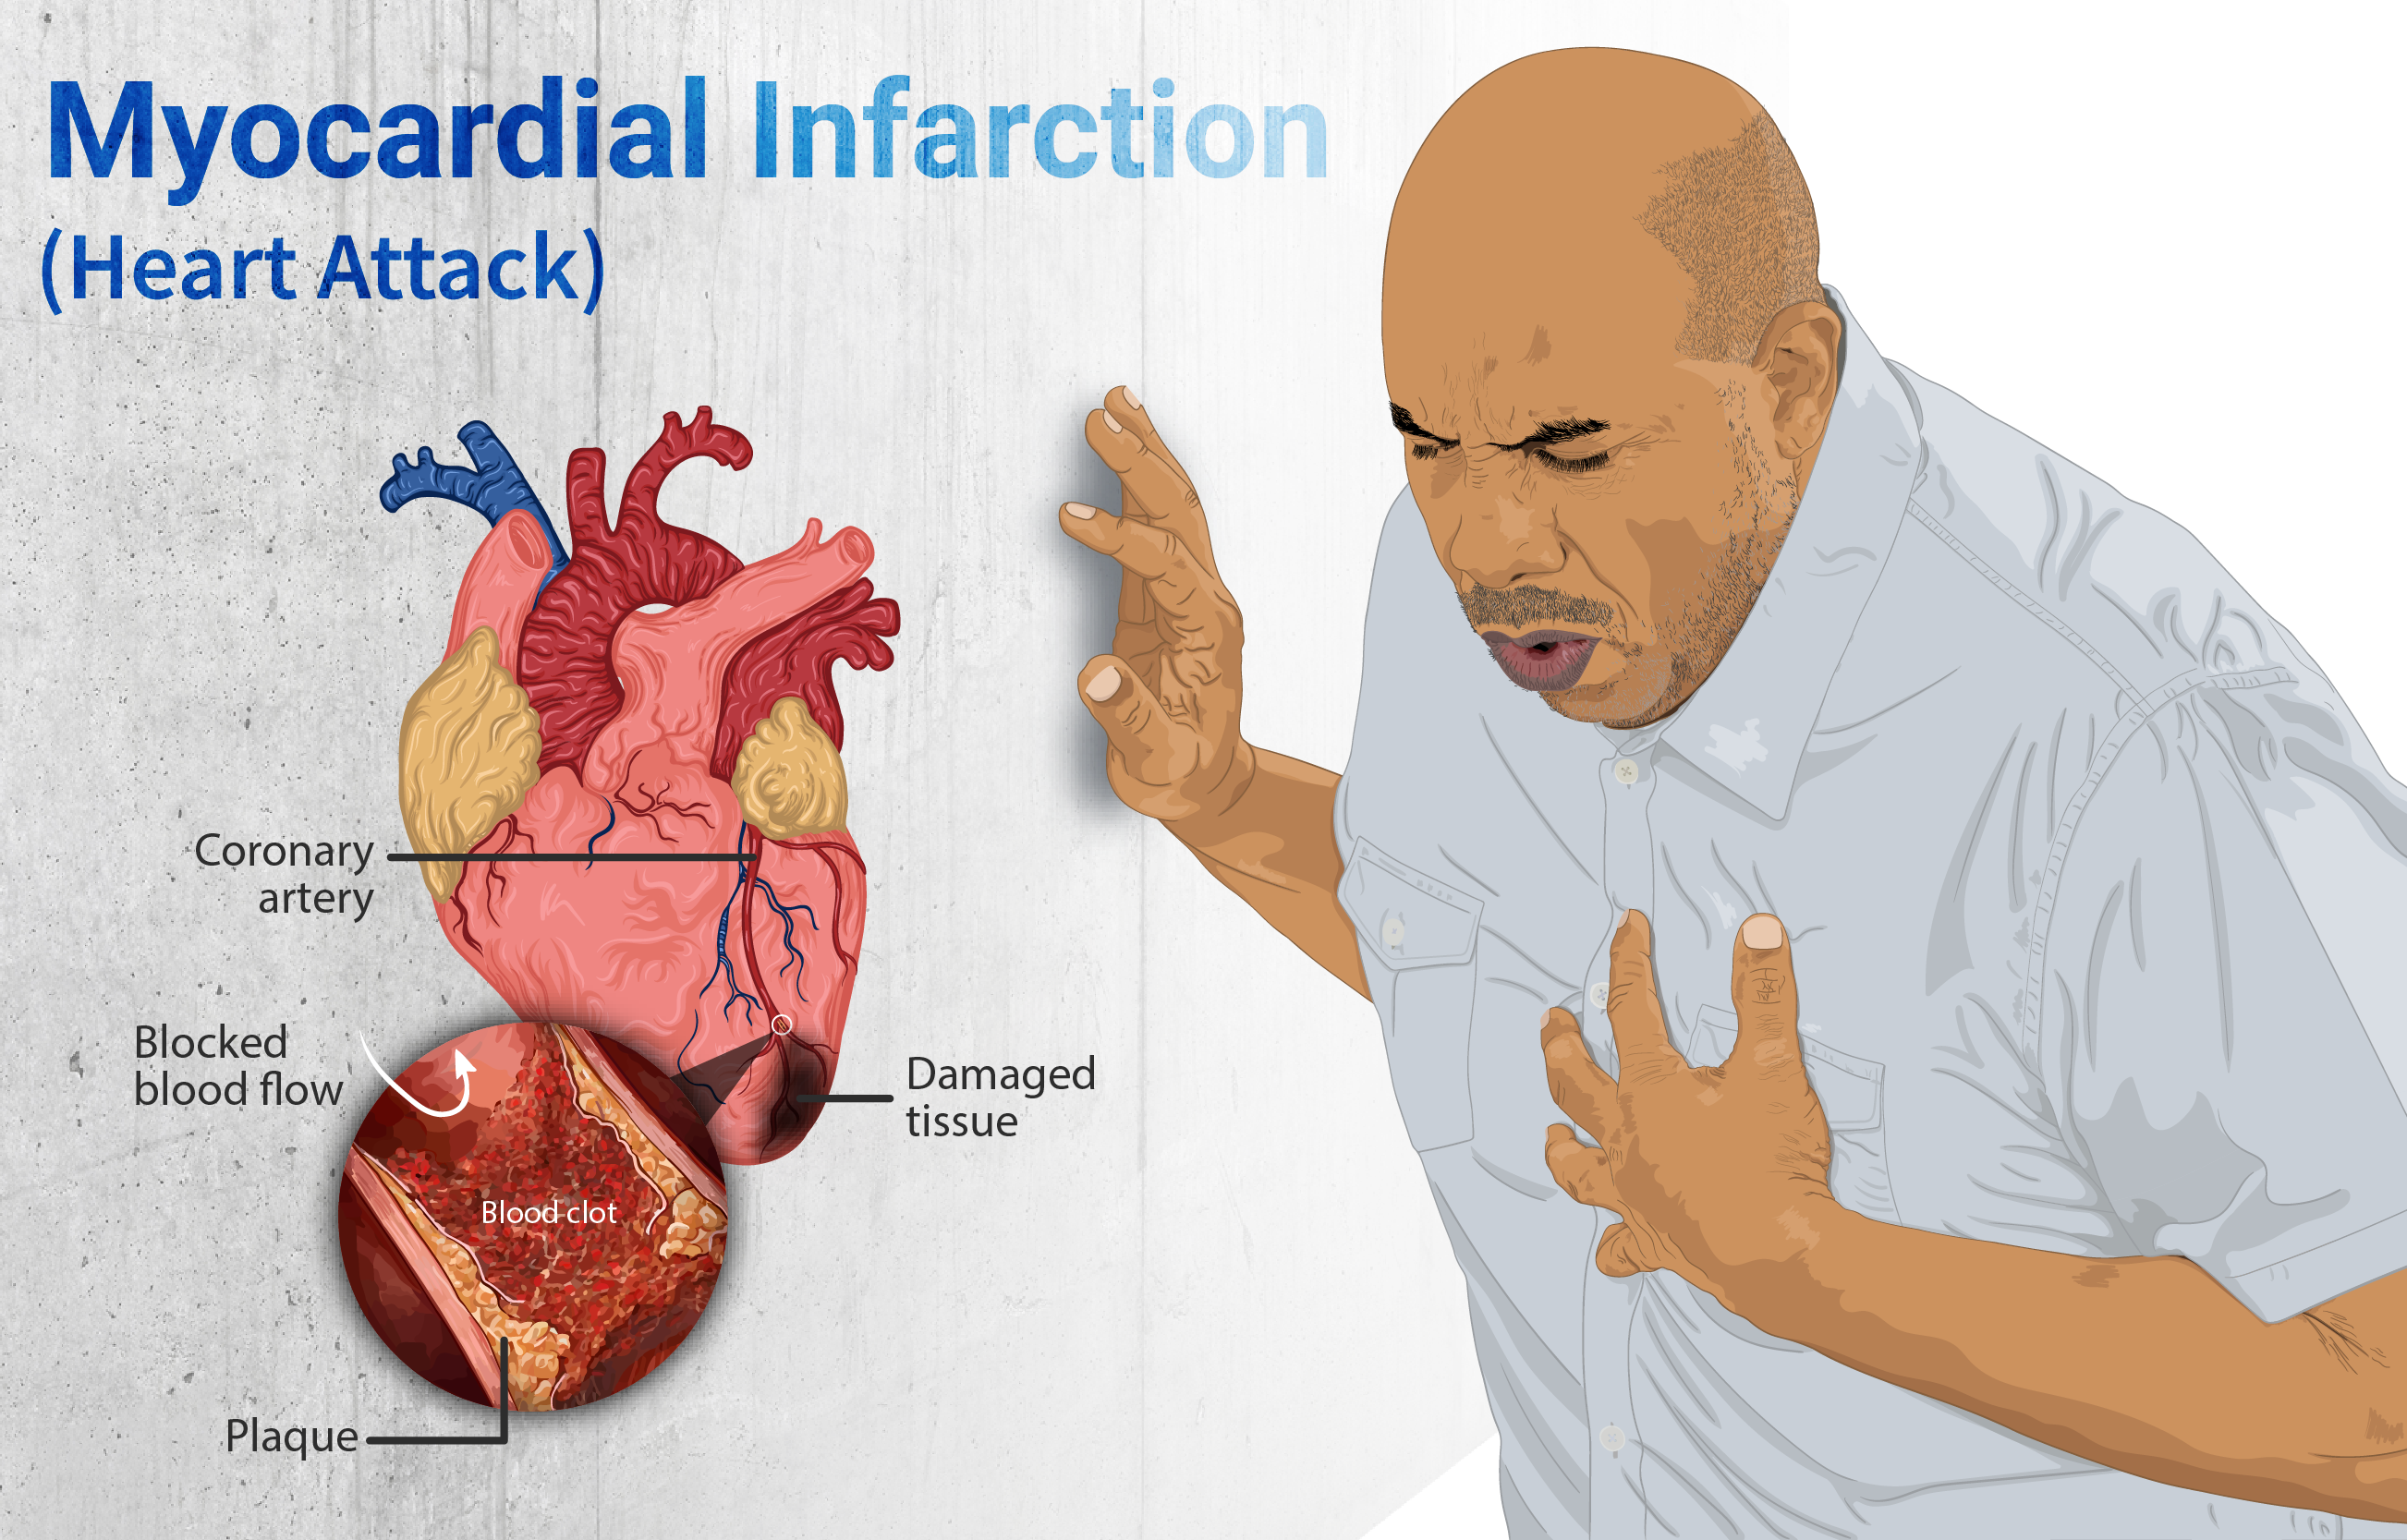 Illustration showing the effects of a Myocardial Infarction